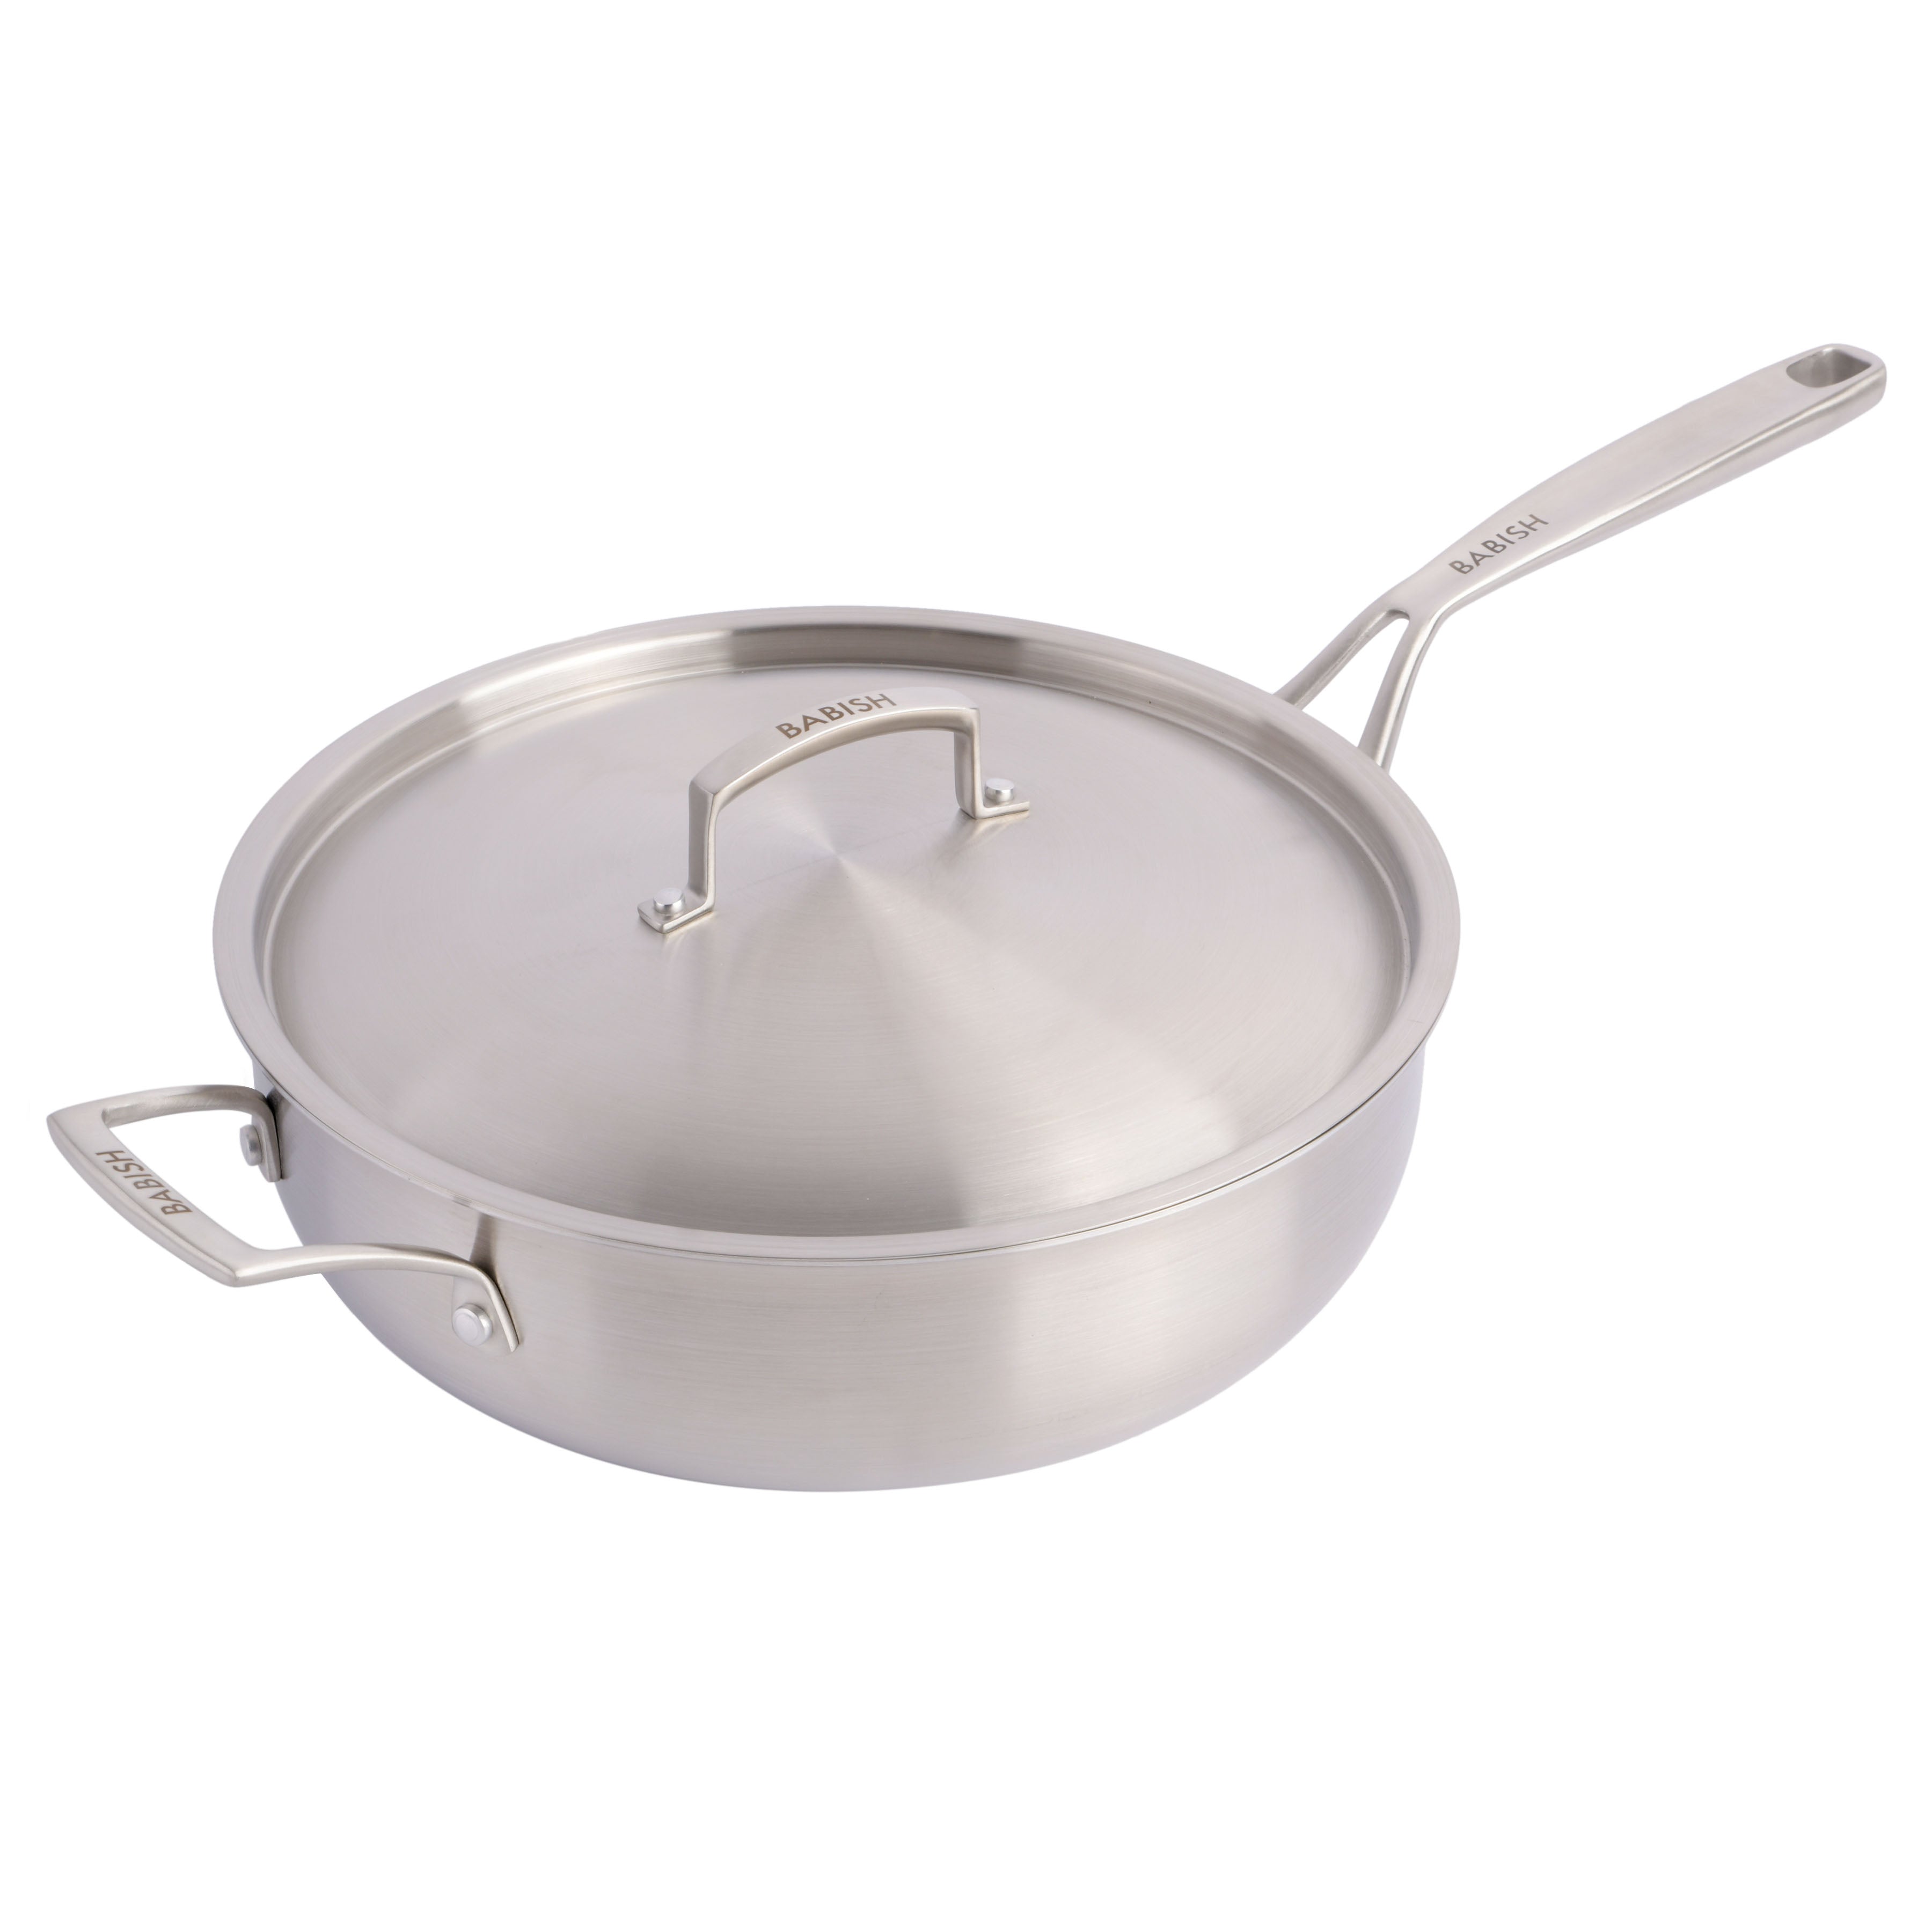 All-Clad Tri-Ply Stainless Steel Sauce Pan with Lid 